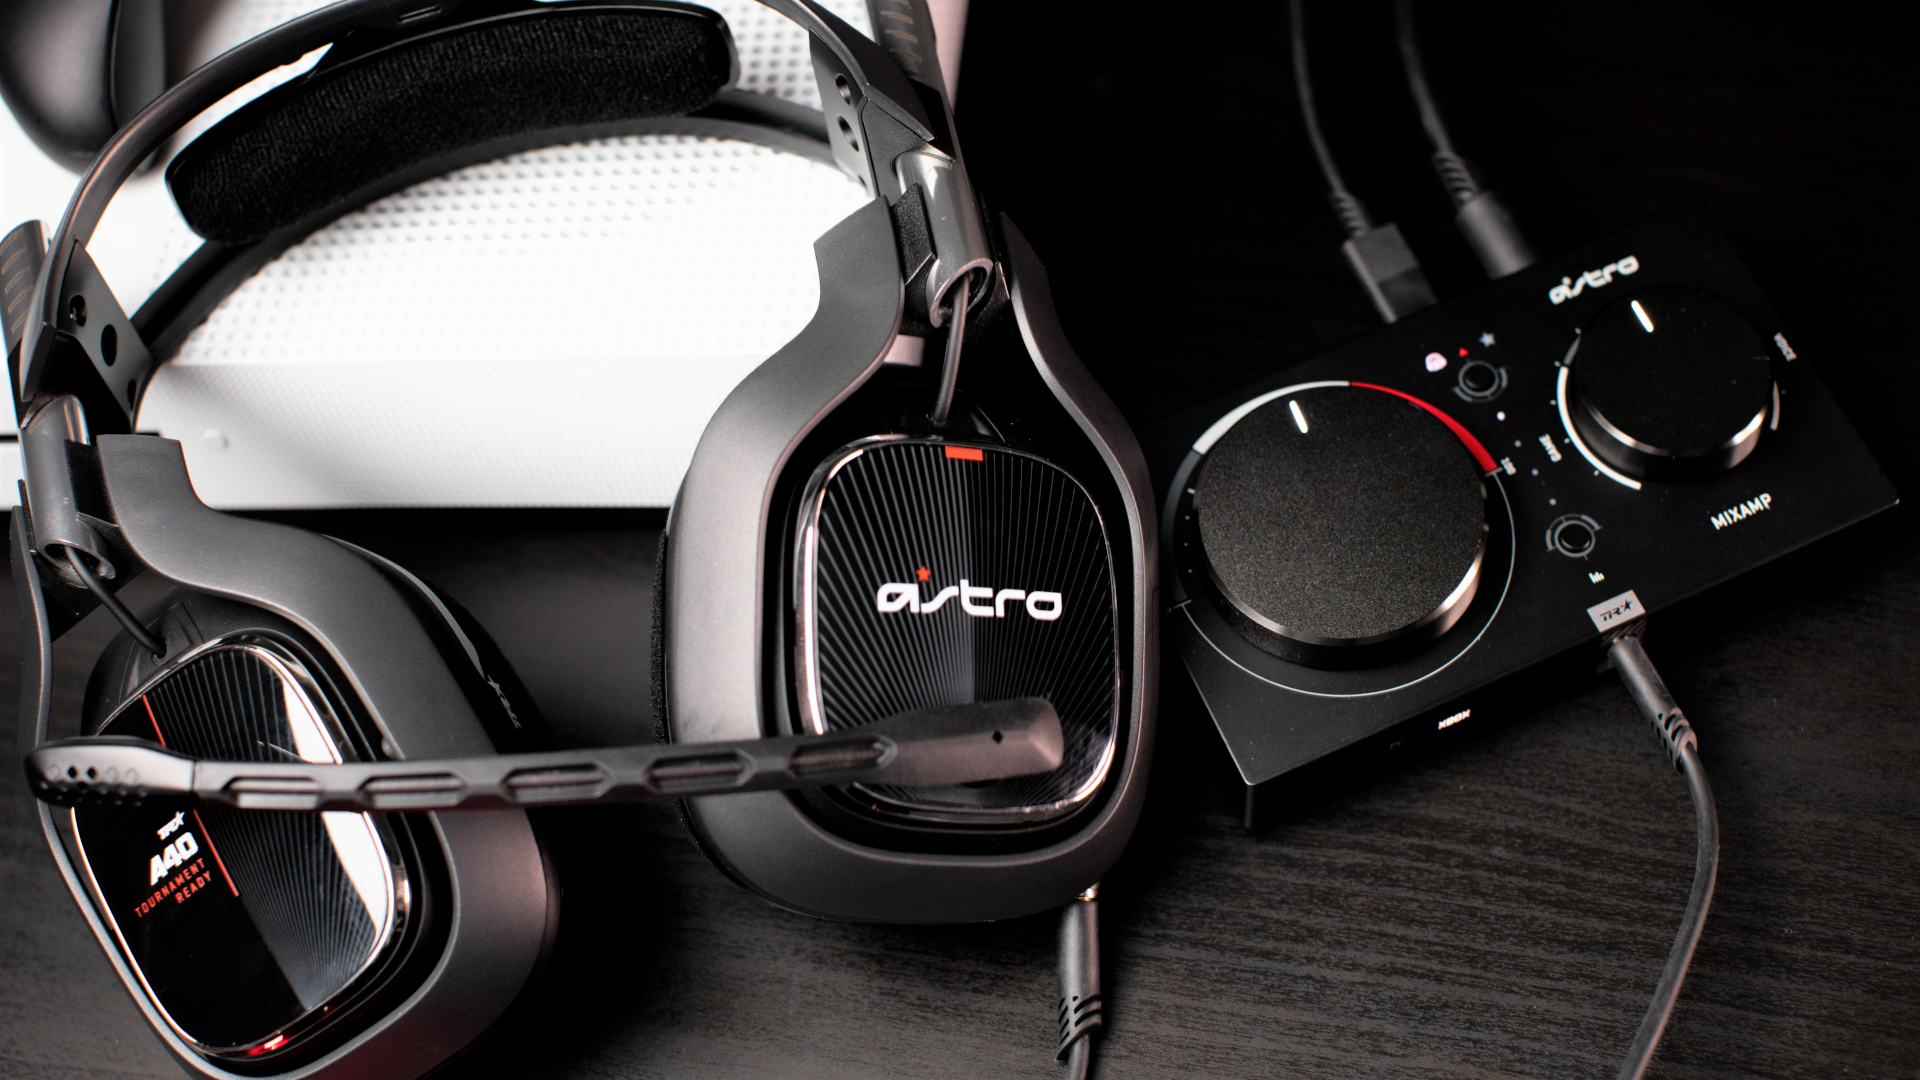 can you use astro a40 xbox one on ps4